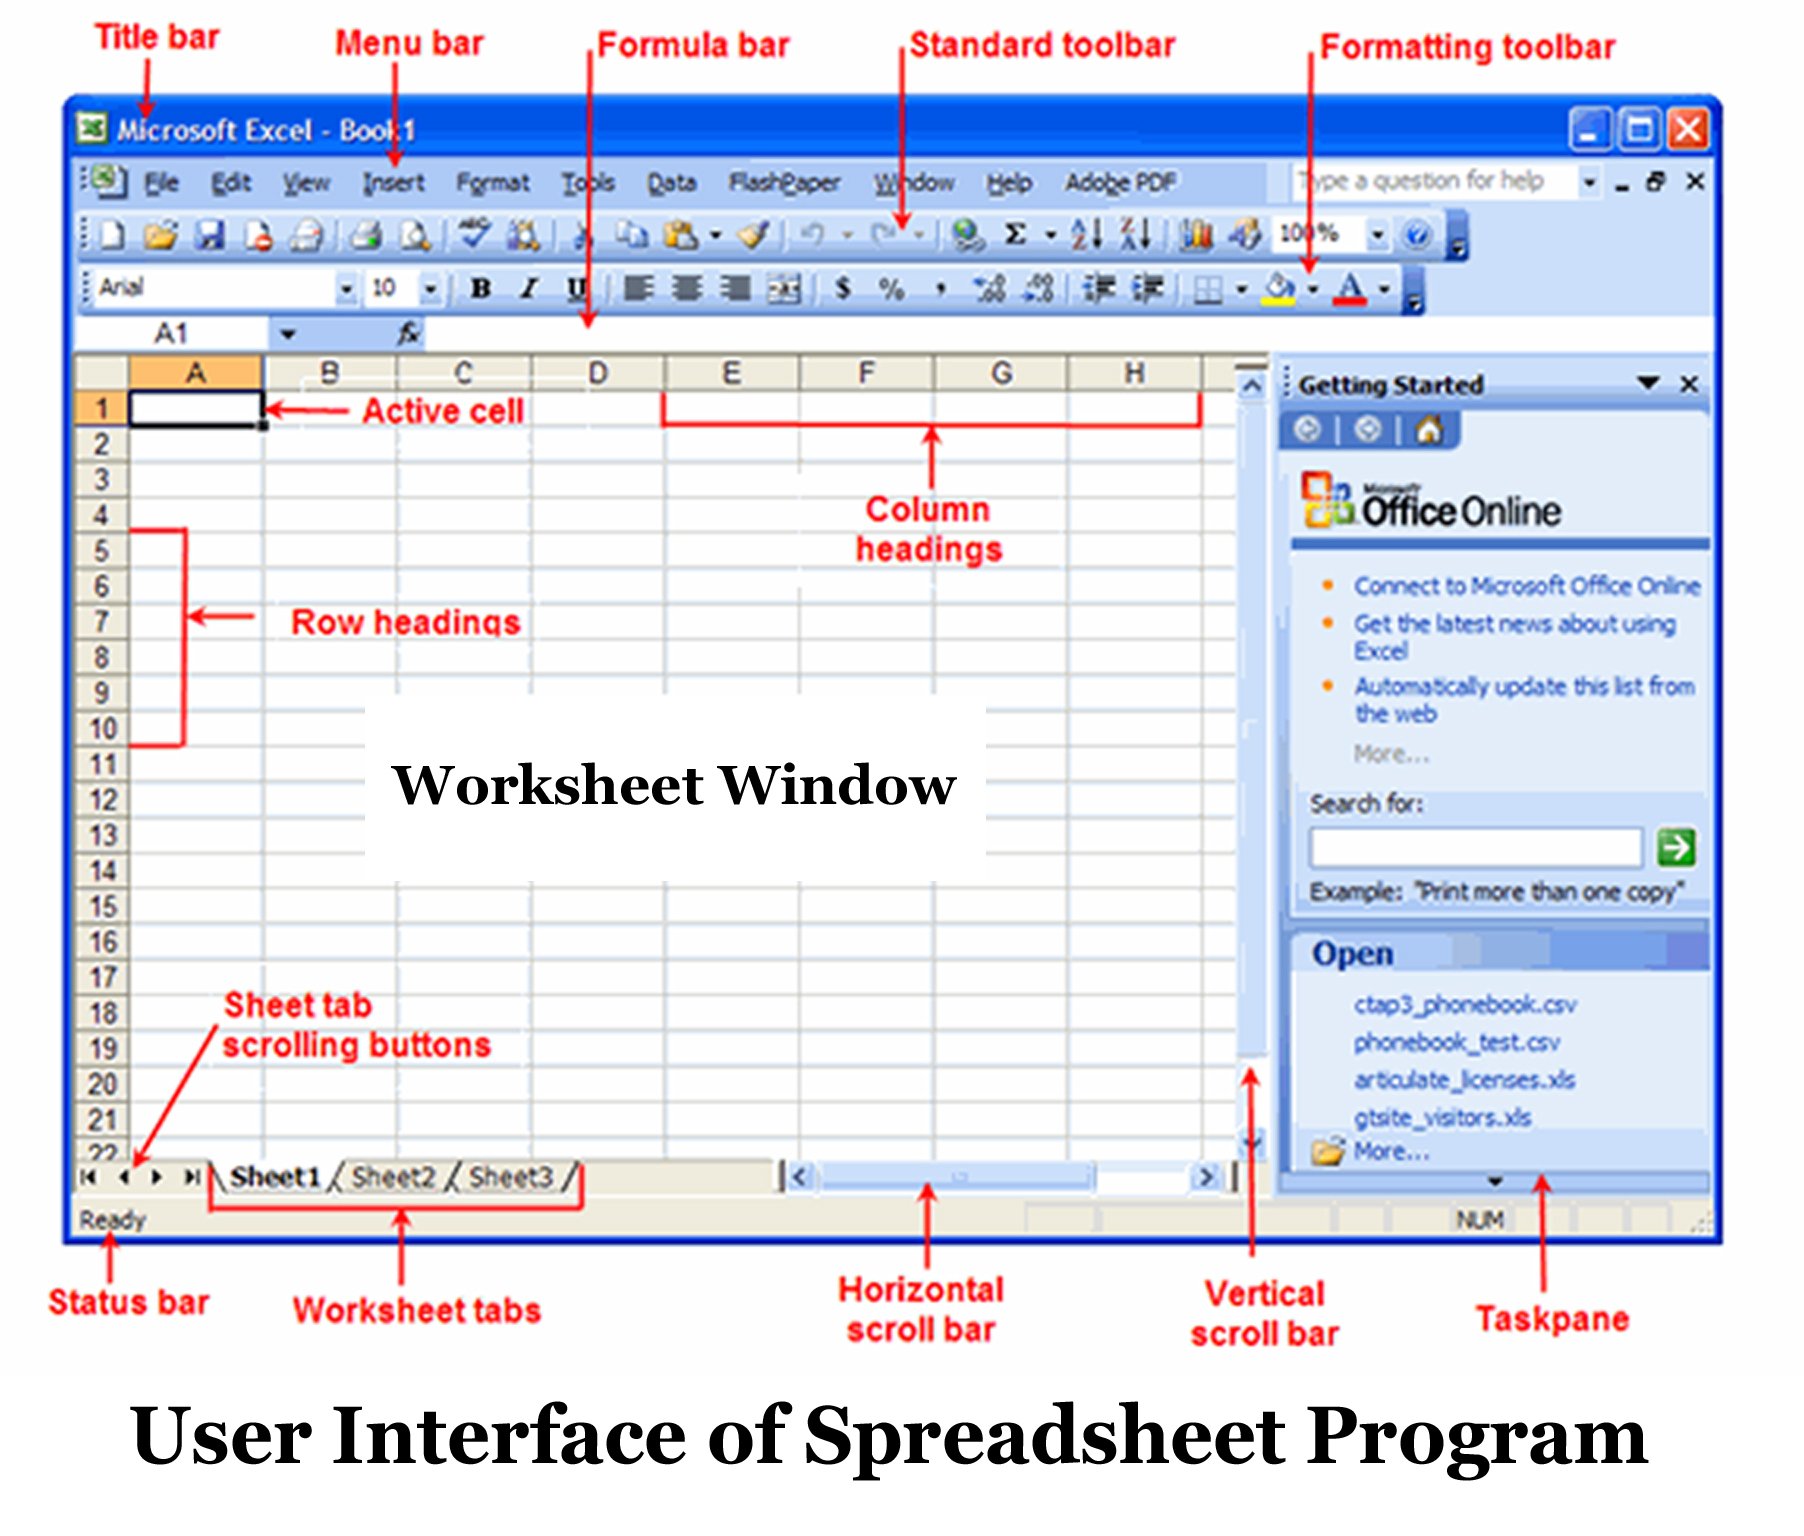 Spreadsheet, Its Basic Features And User Interface With Spreadsheet Software Programs